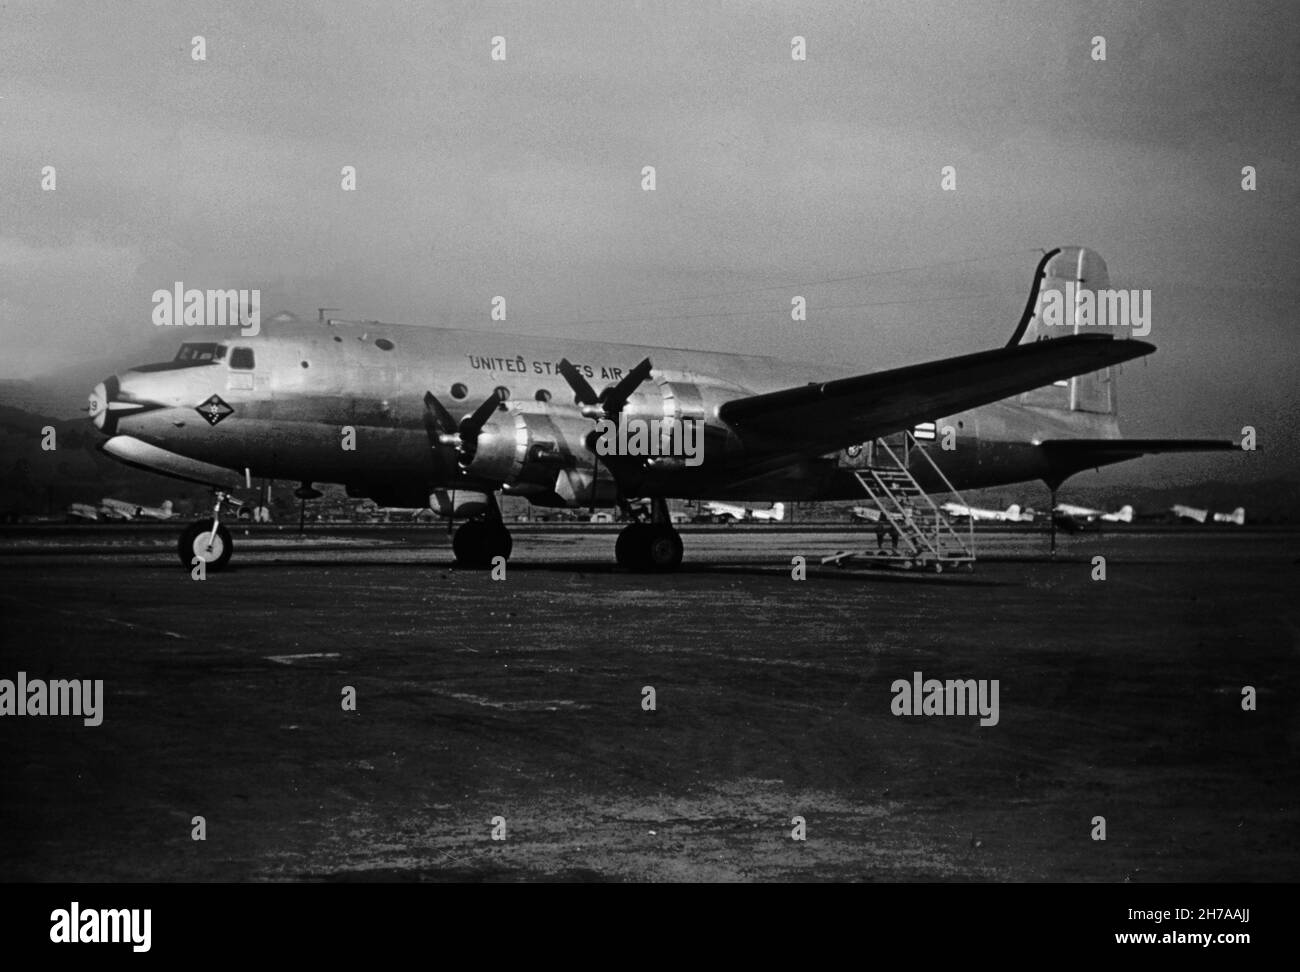 A photograph of a Douglas C-54E transport aircraft of the United States Air Force, serial number 44-9149, taken at Seoul during the Korean War, in 1953 or 1954. Stock Photo